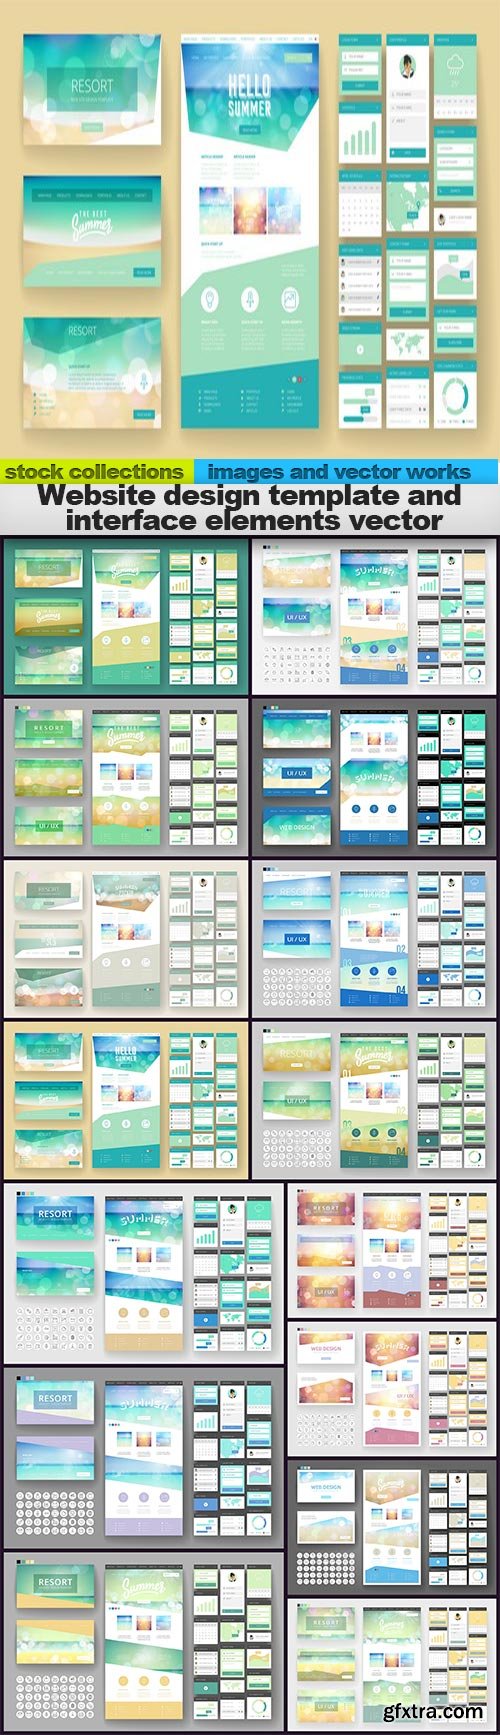 Website design template and interface elements vector, 15 x EPS